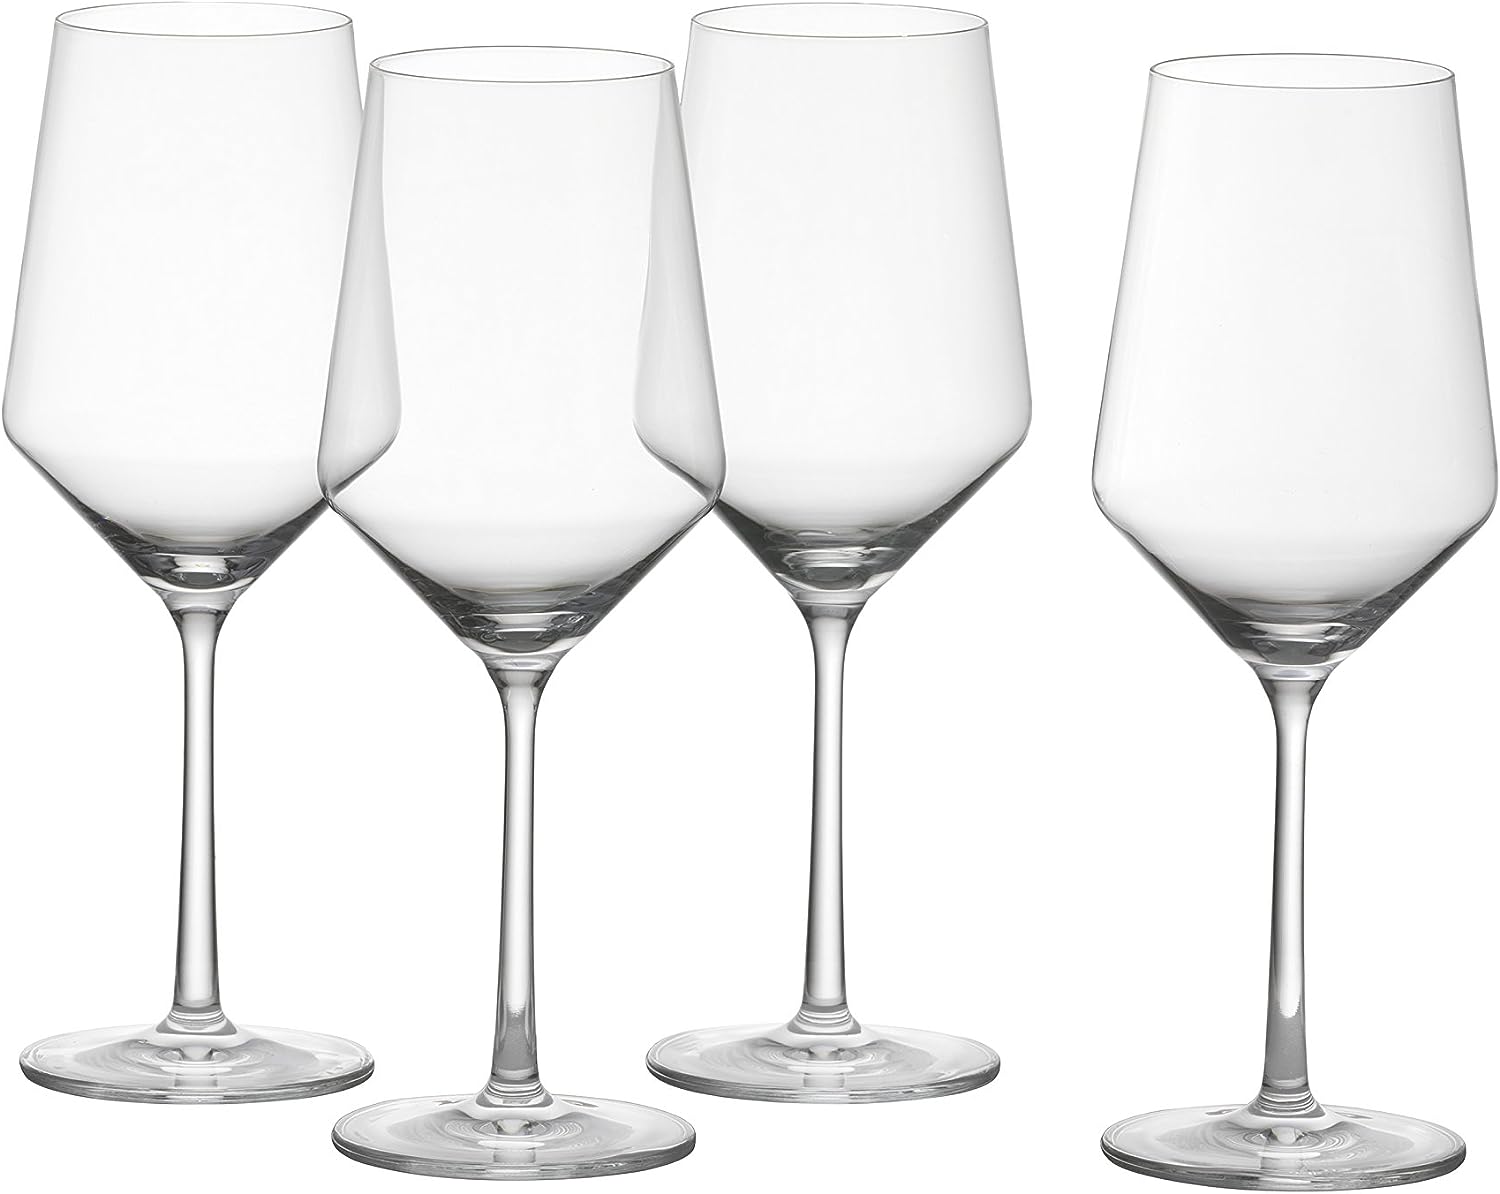 Zwiesel Glas Pure Tritan Crystal Stemware Collection, 4 Count